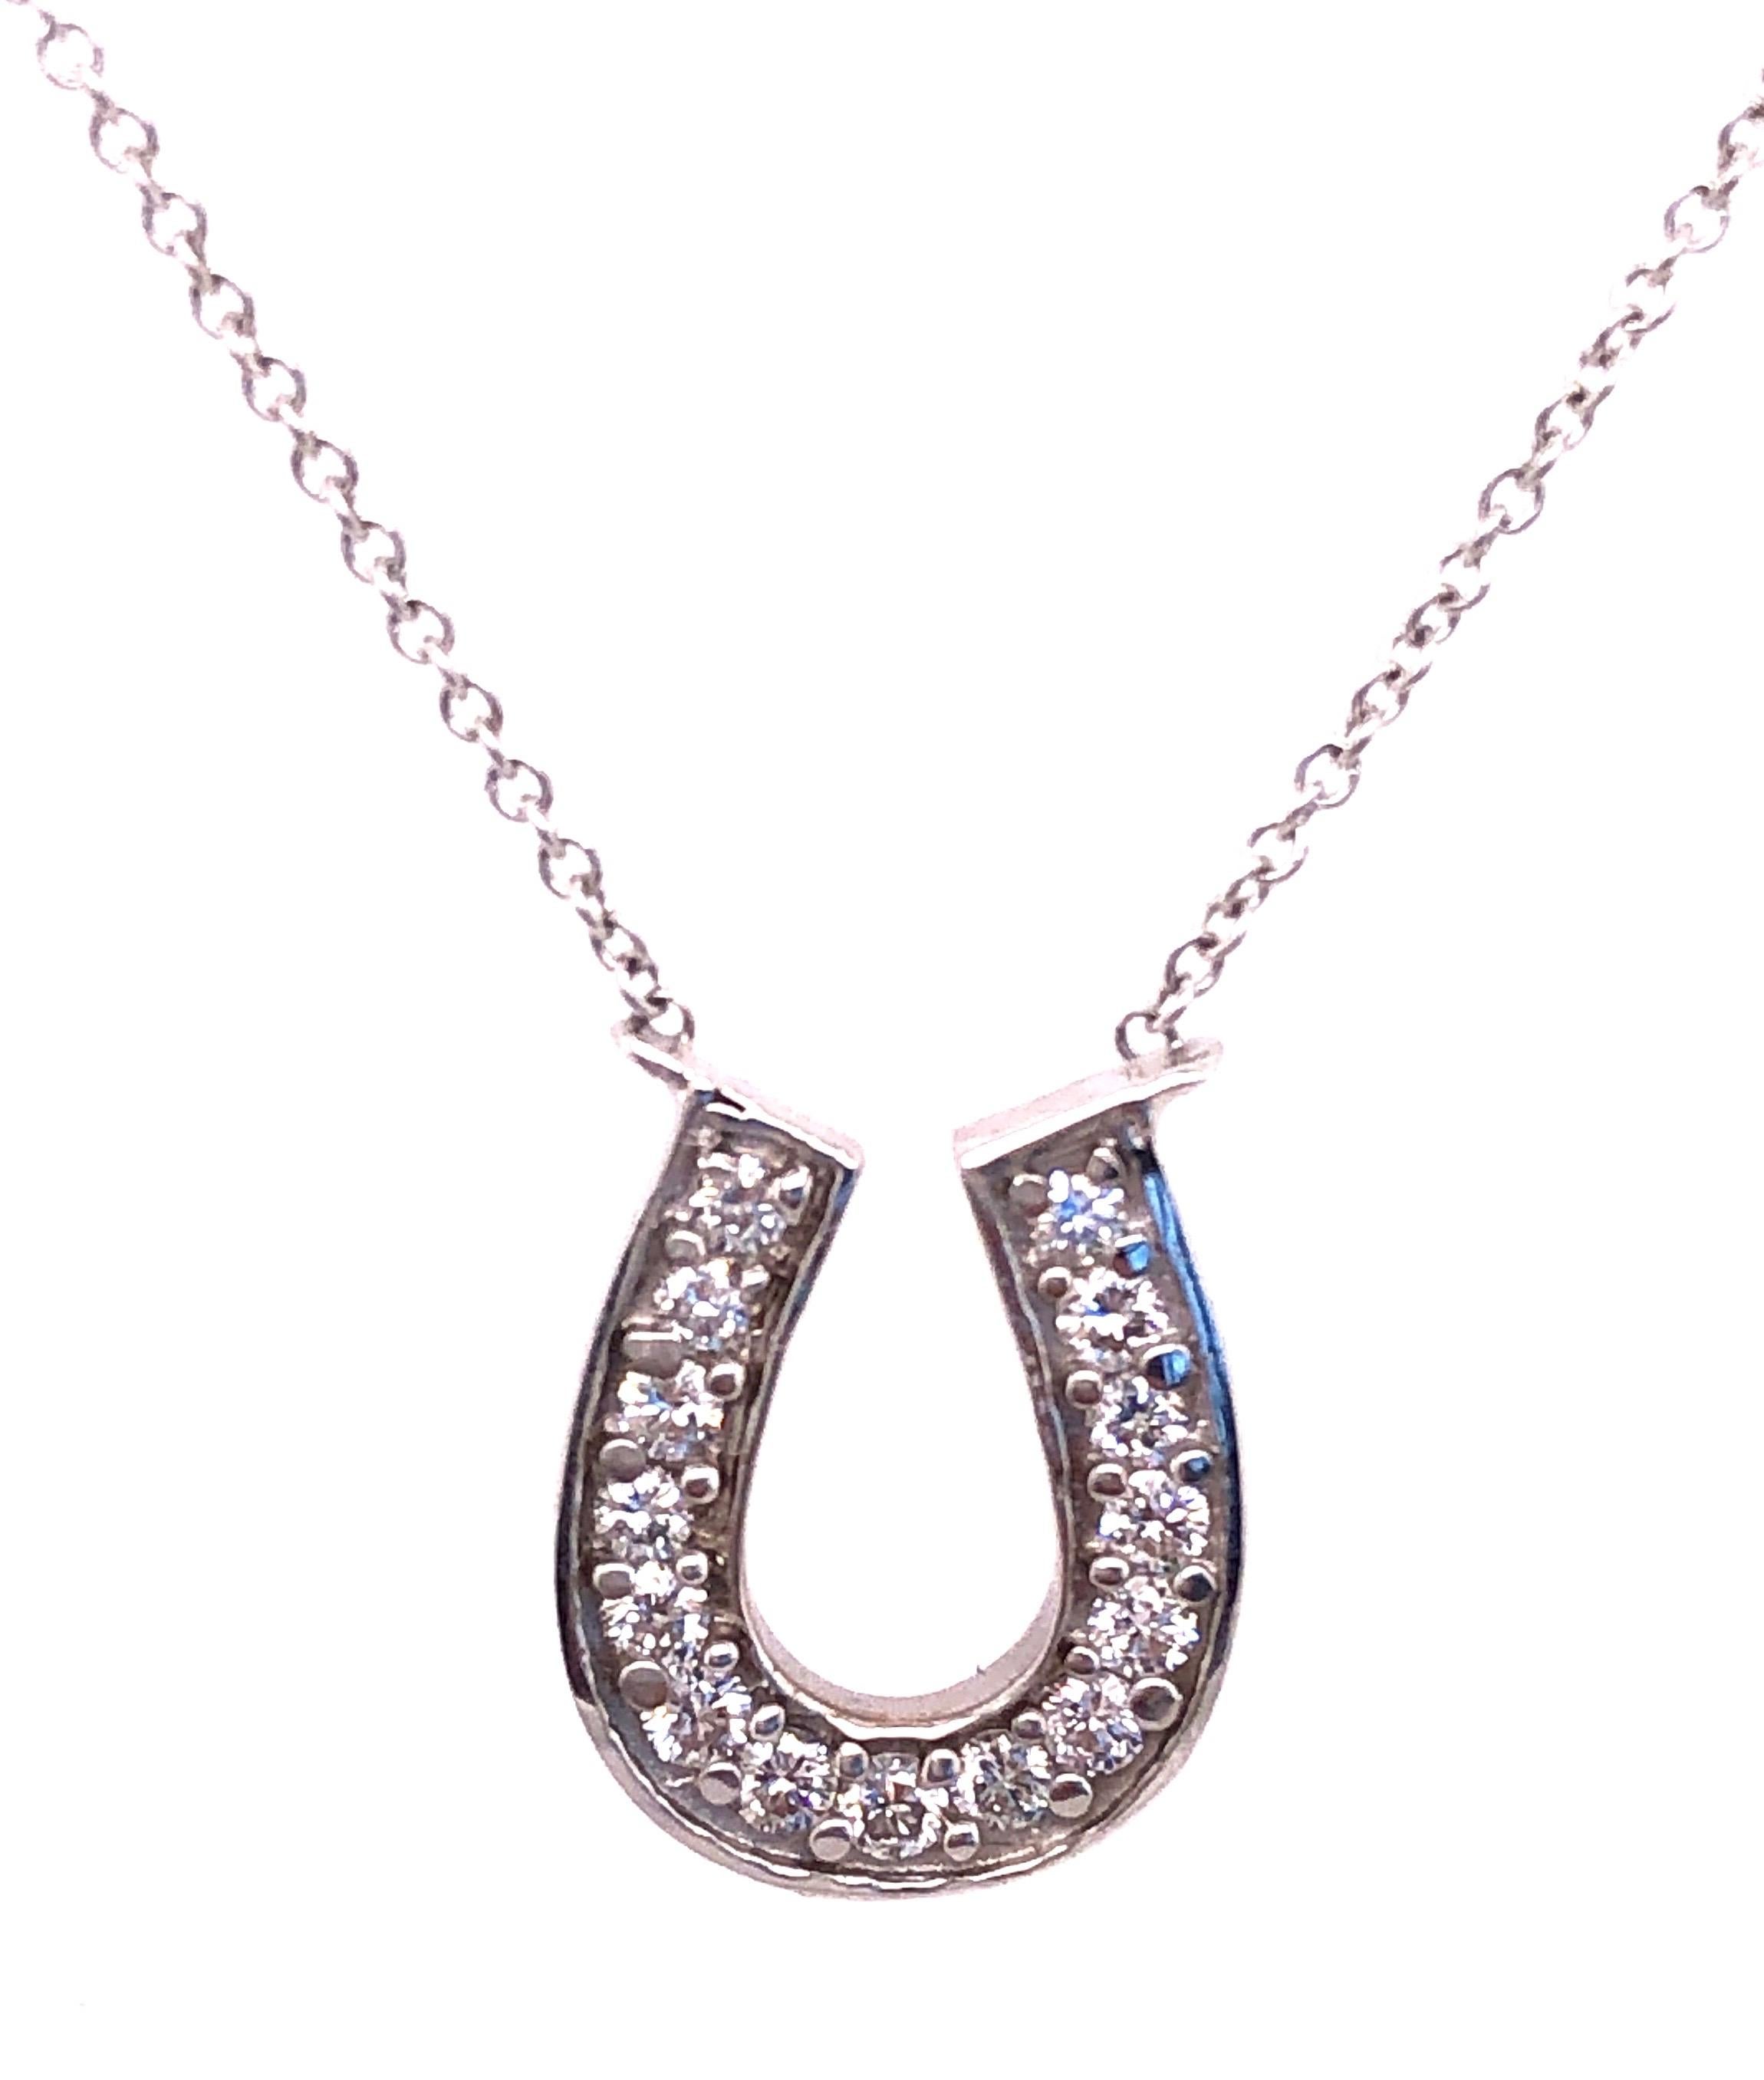 18 Karat White Gold  16 inch Cable Link Necklace with horse shoe soldered Pendant 0.50 Total Diamond weight.
2.70 grams total weight.